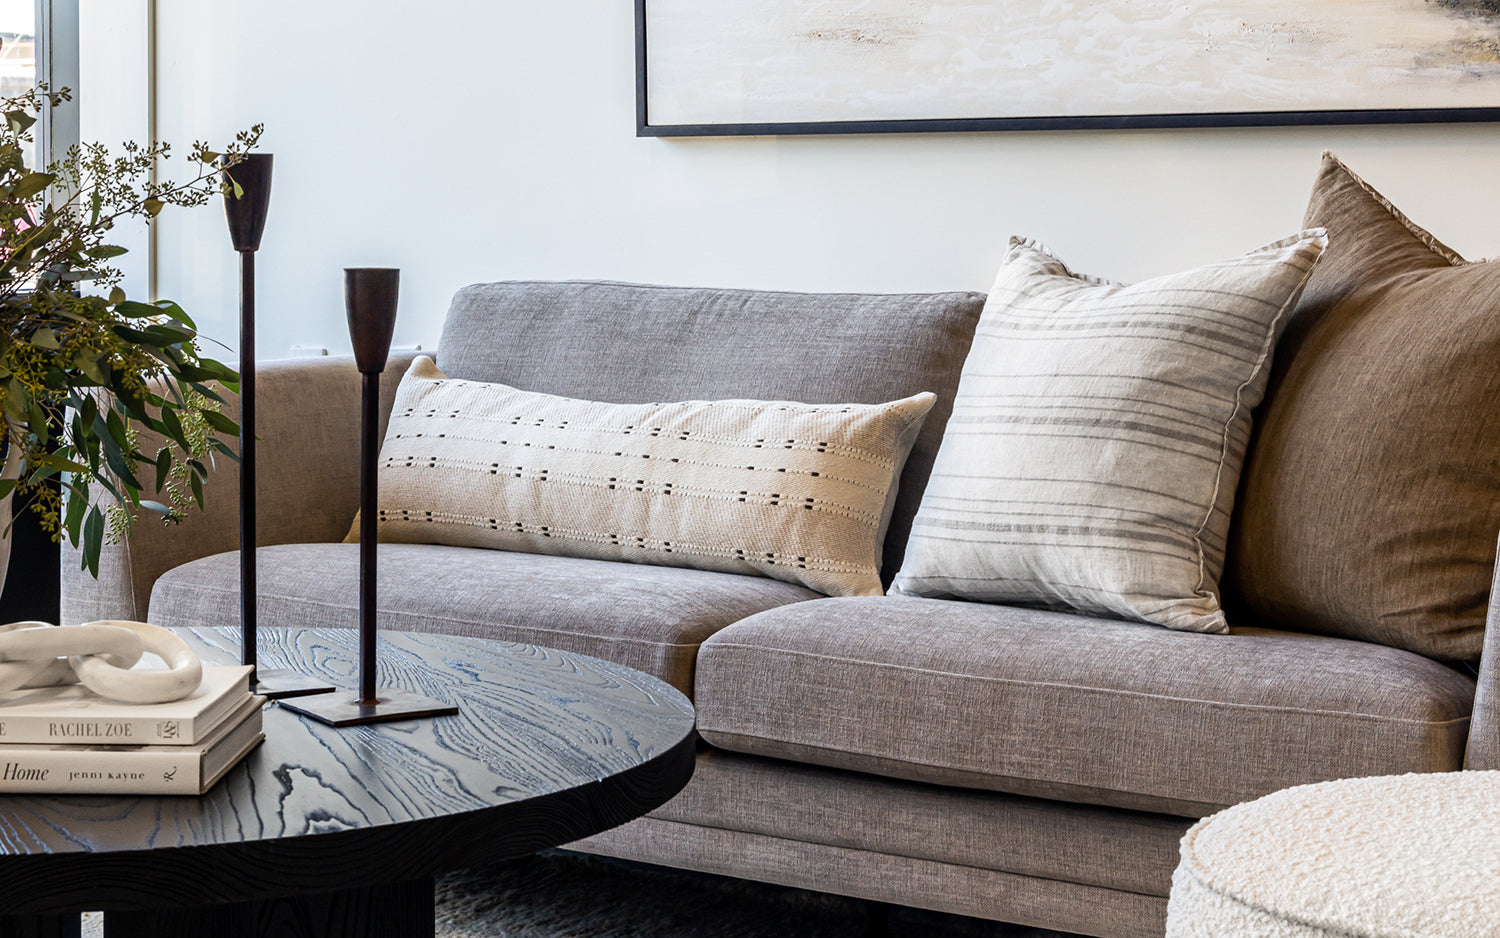 How To Buy The Perfect Luxury Sofa Online